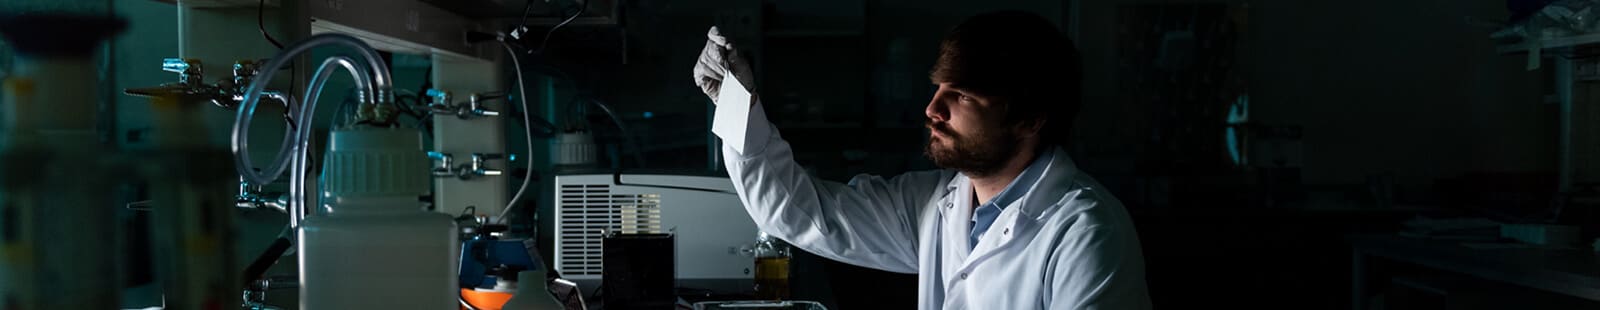 A person works in a darkly lit laboratory